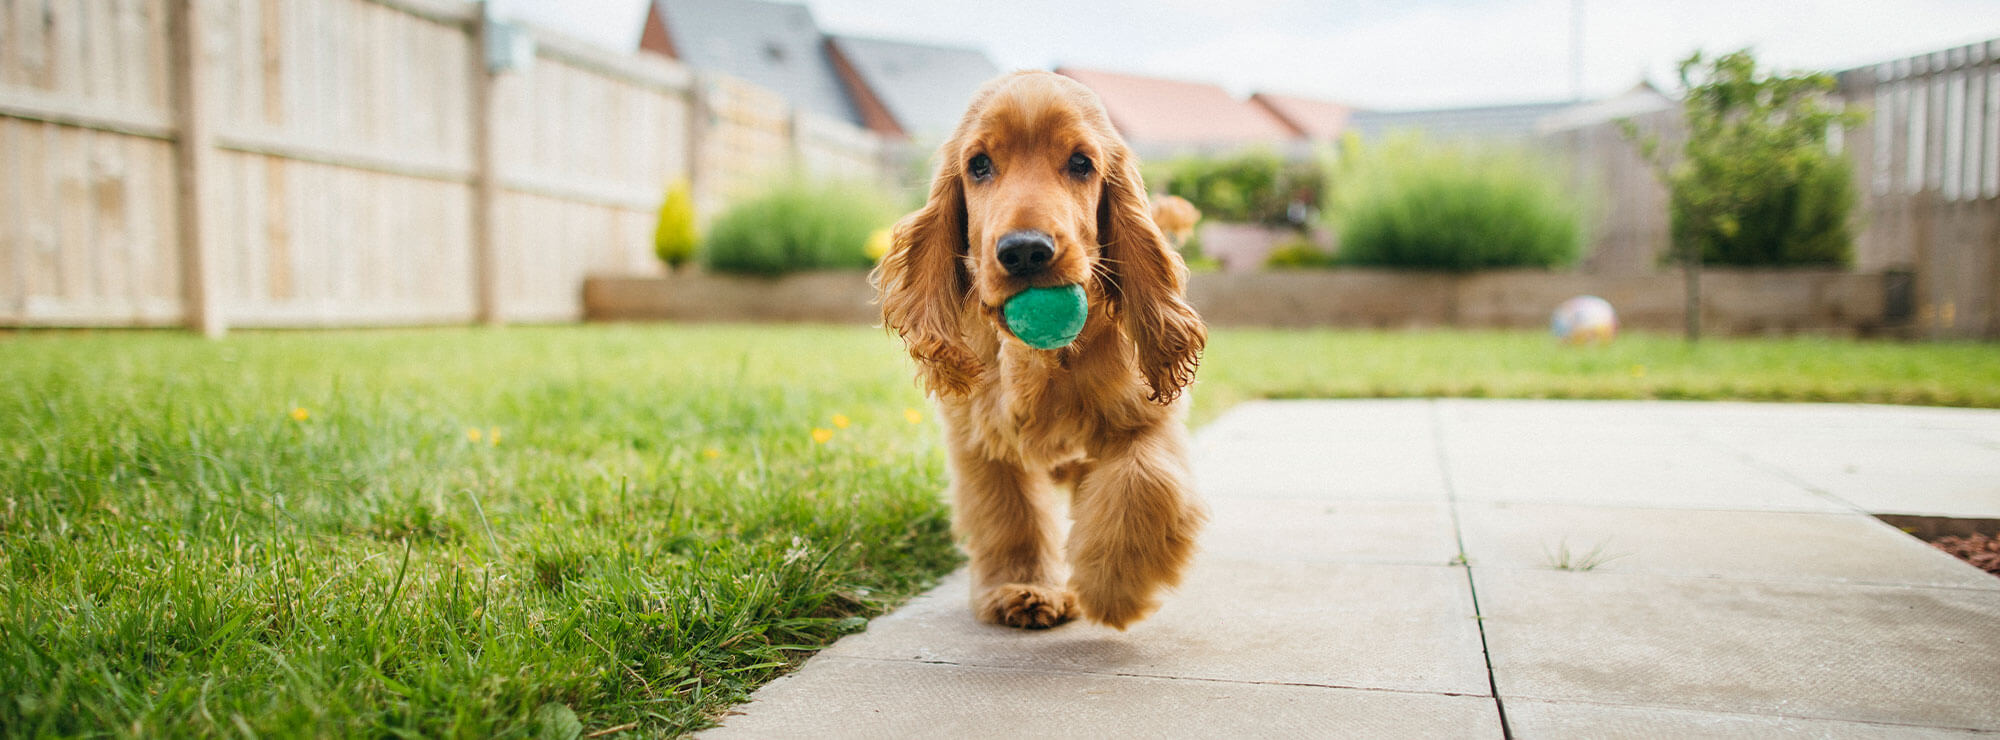 dog with green ball